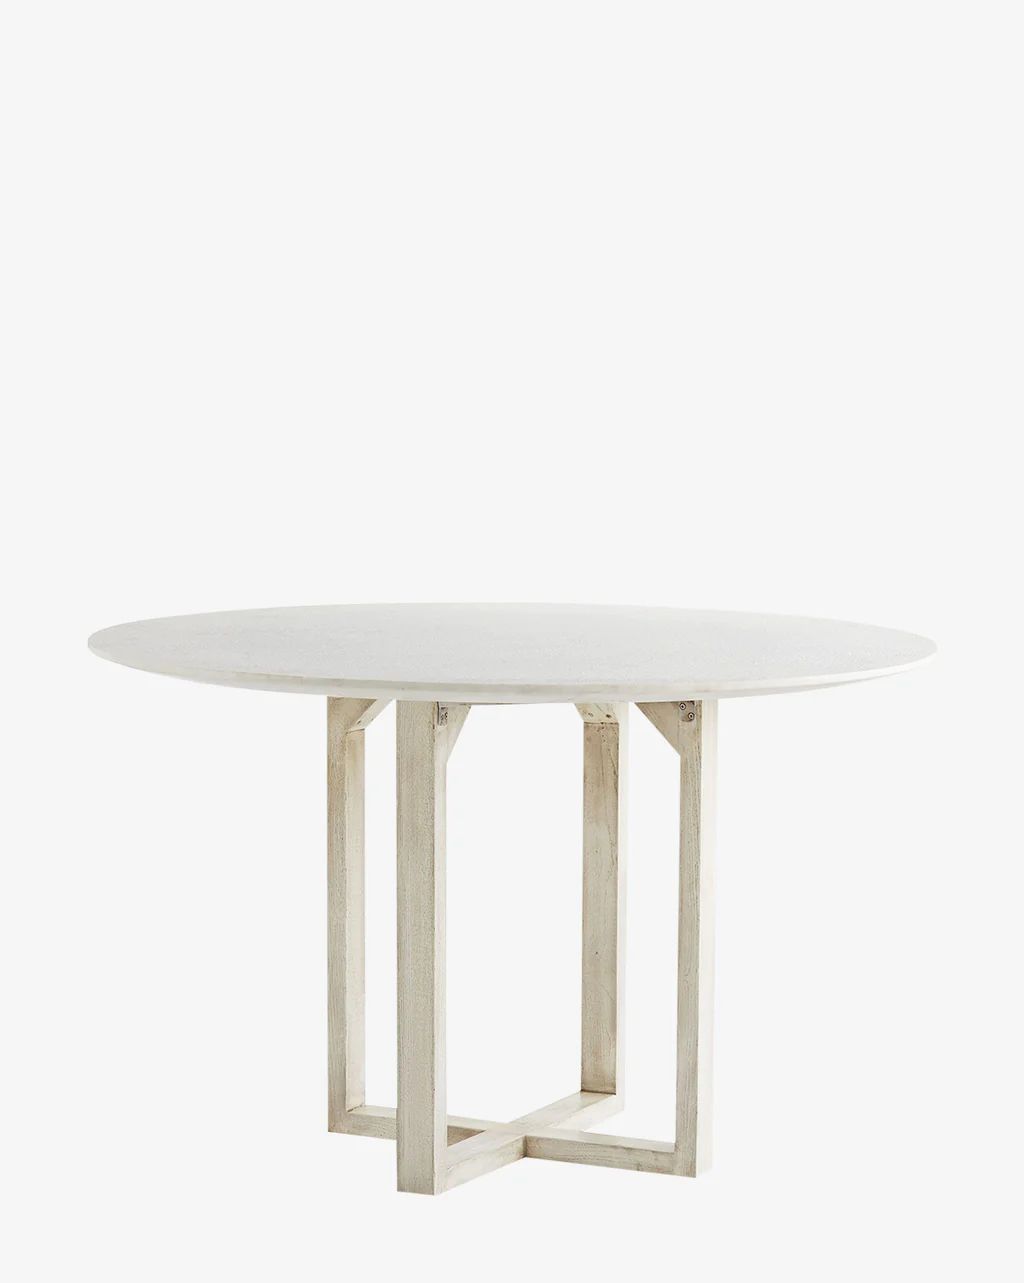 Mellor Dining Table | McGee & Co.